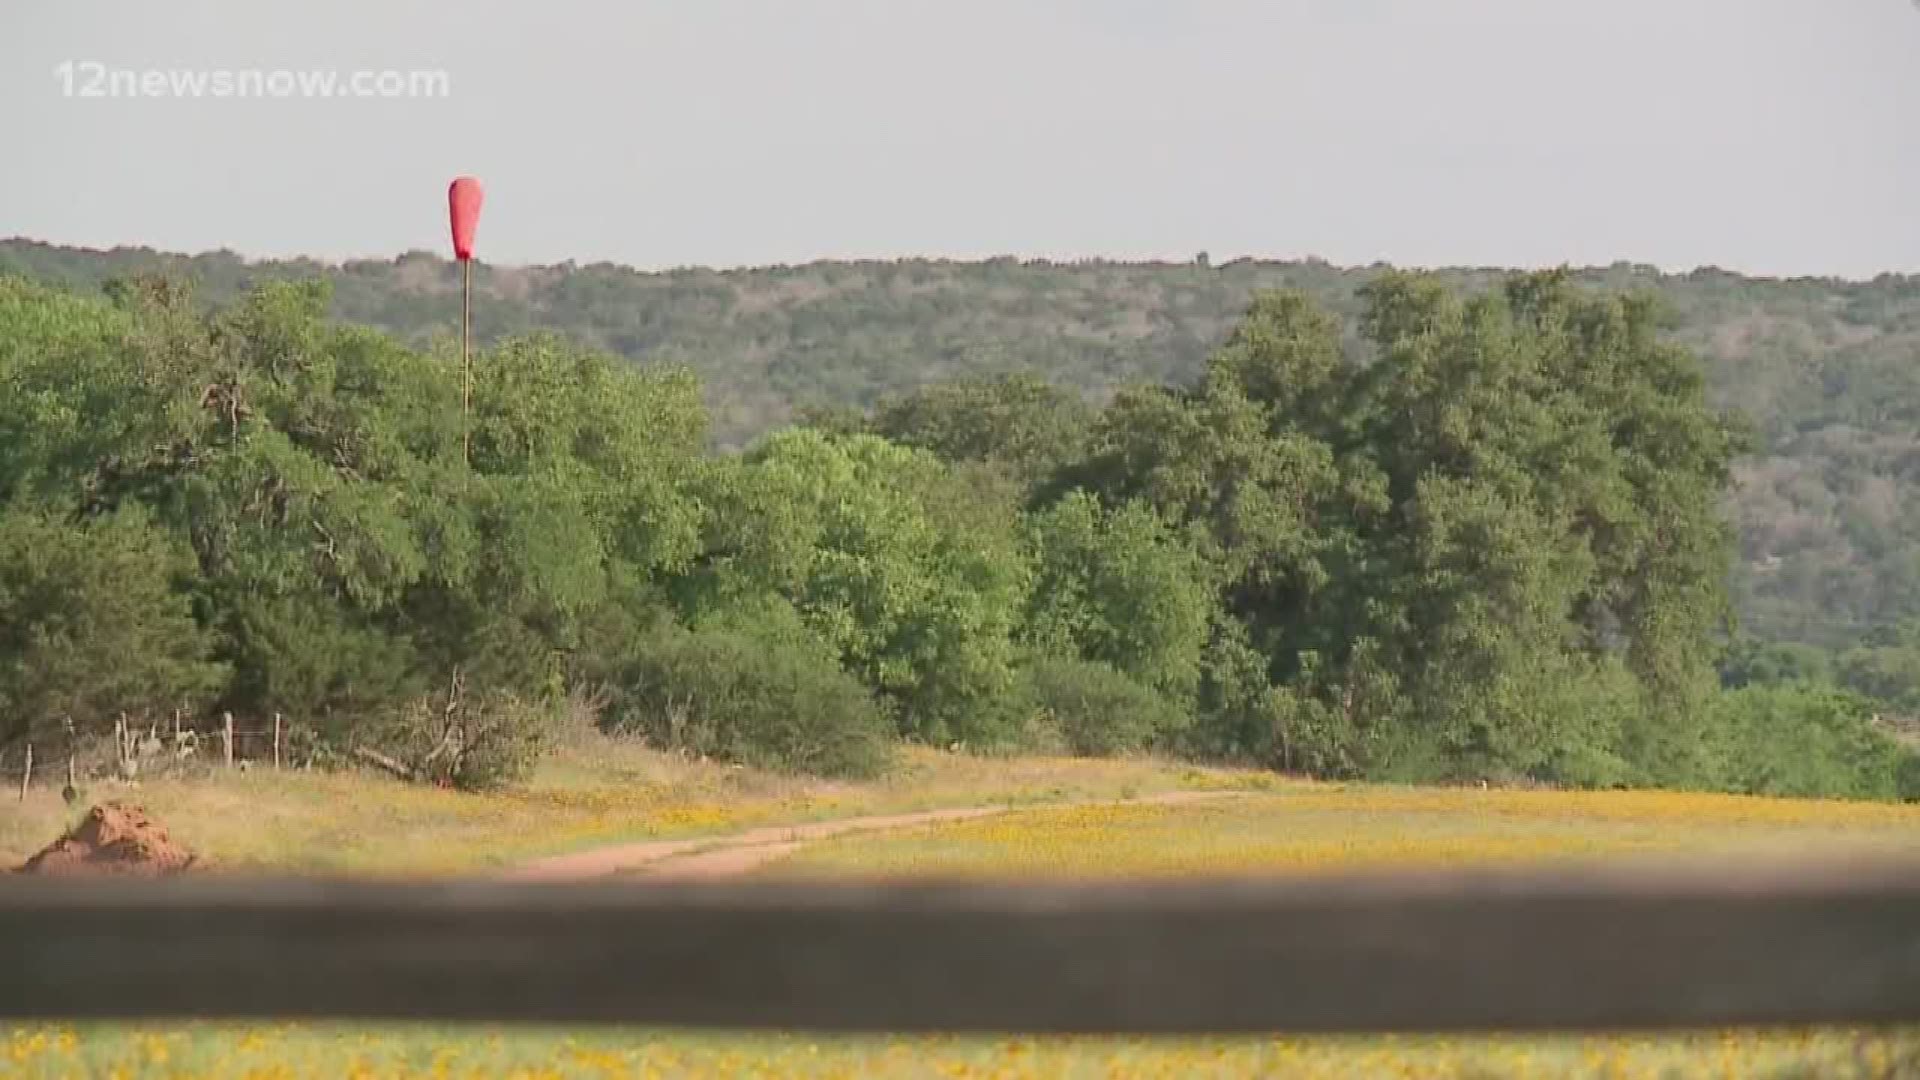 A single-engine plane crashed near Austin yesterday afternoon, killing two people. Officials say it happened just after 2:30 P.M. at the Shirley Williams Airport in Kingsland. They say the plane caught fire upon crashing, but the cause is still unknown. The National Transportation Safety Board is investigating.